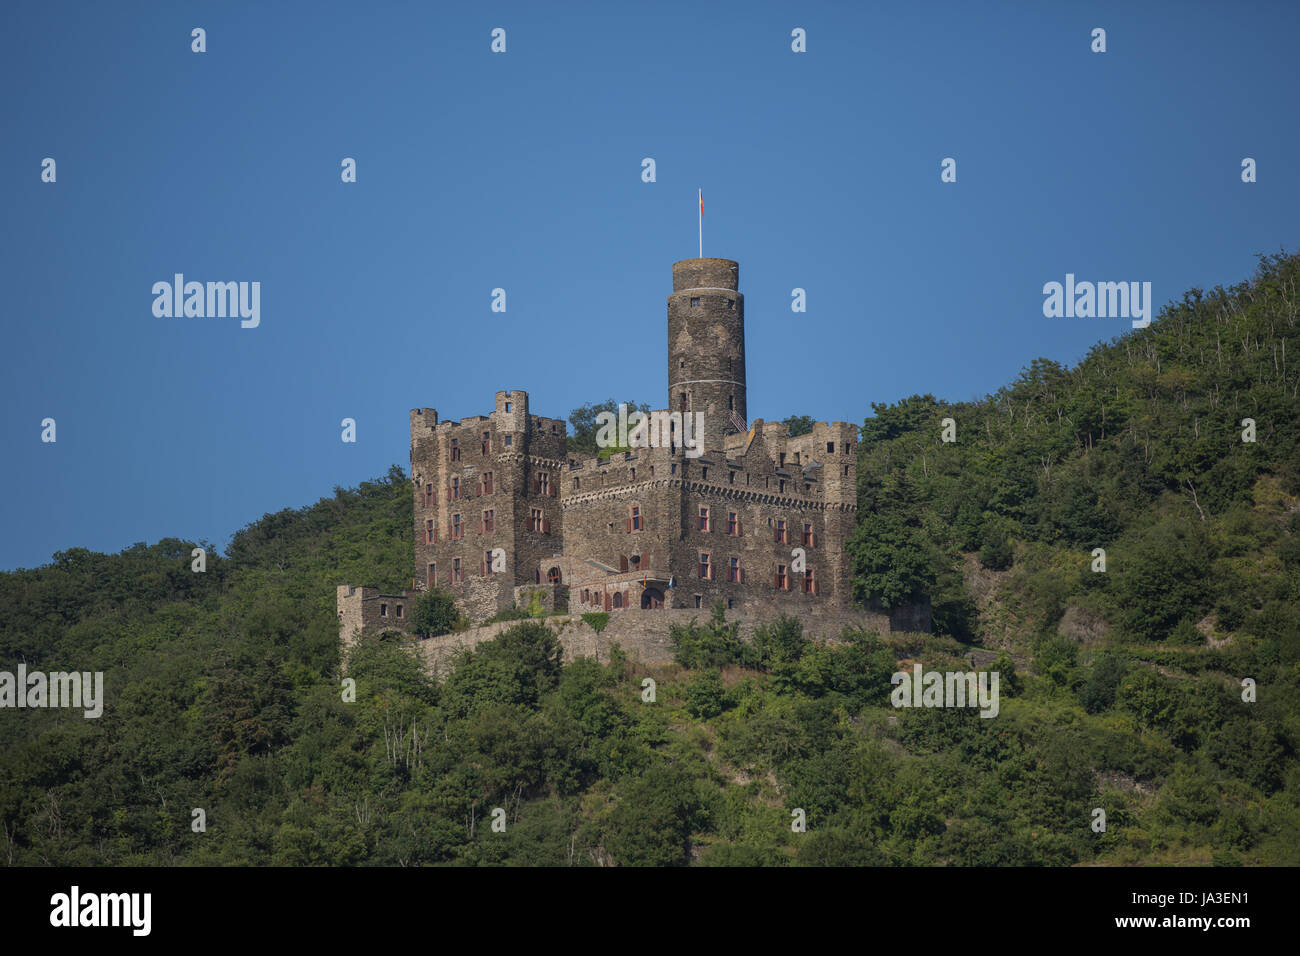 rhine, ruin, locksmith, vouch for, chateau, castle, castles, historical, rhine, Stock Photo